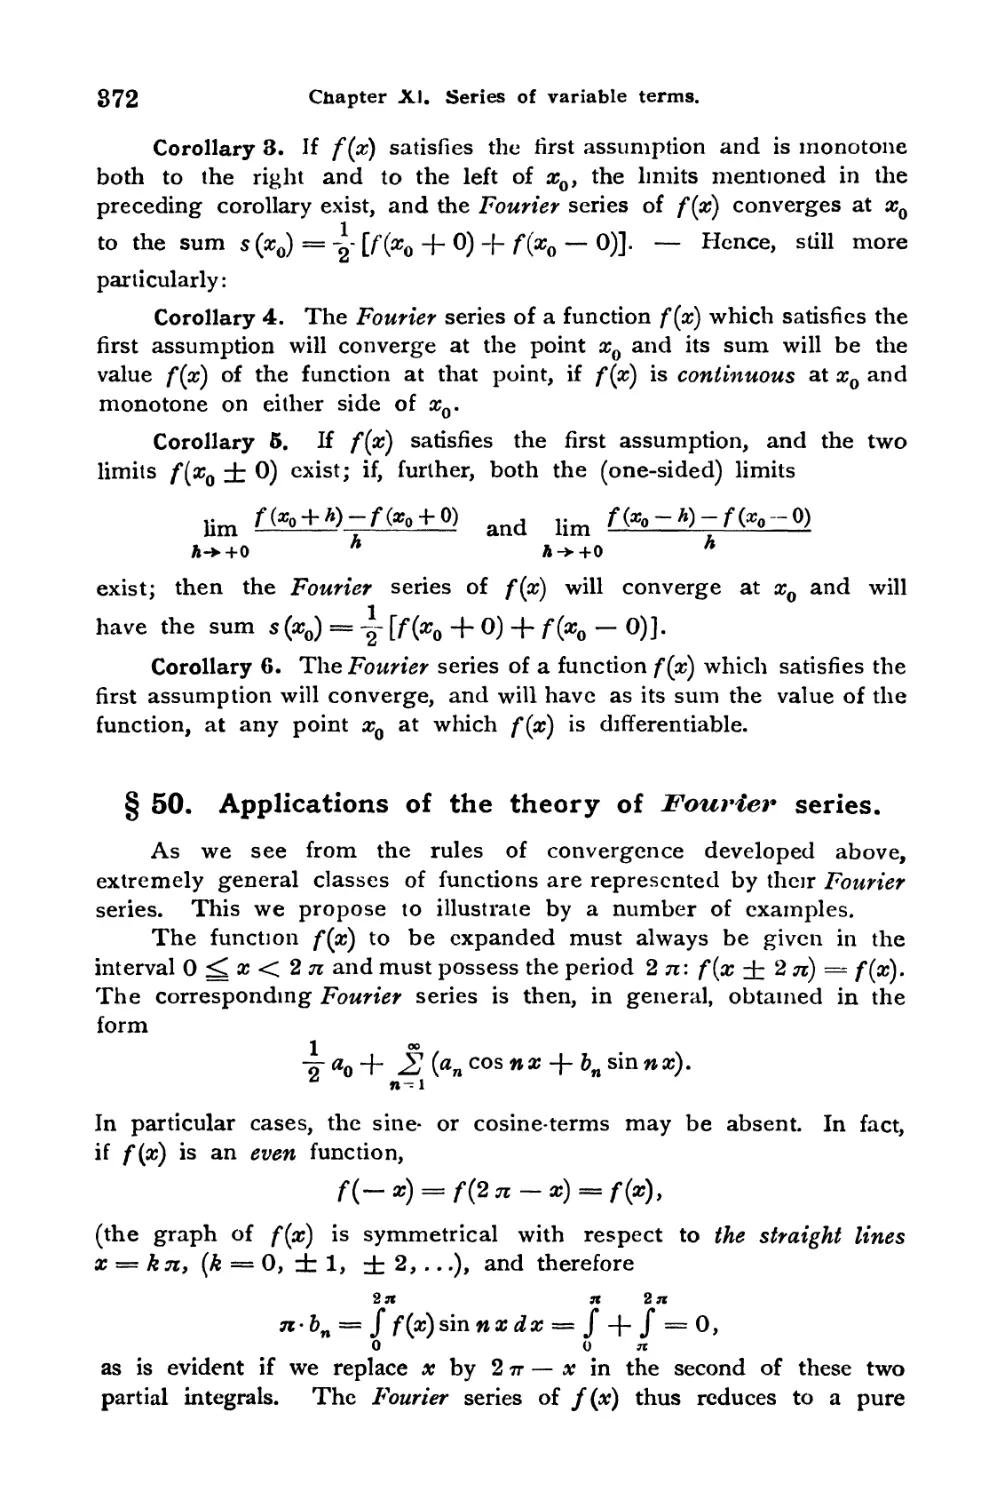 § 50. Applications of the theory of Fourier series